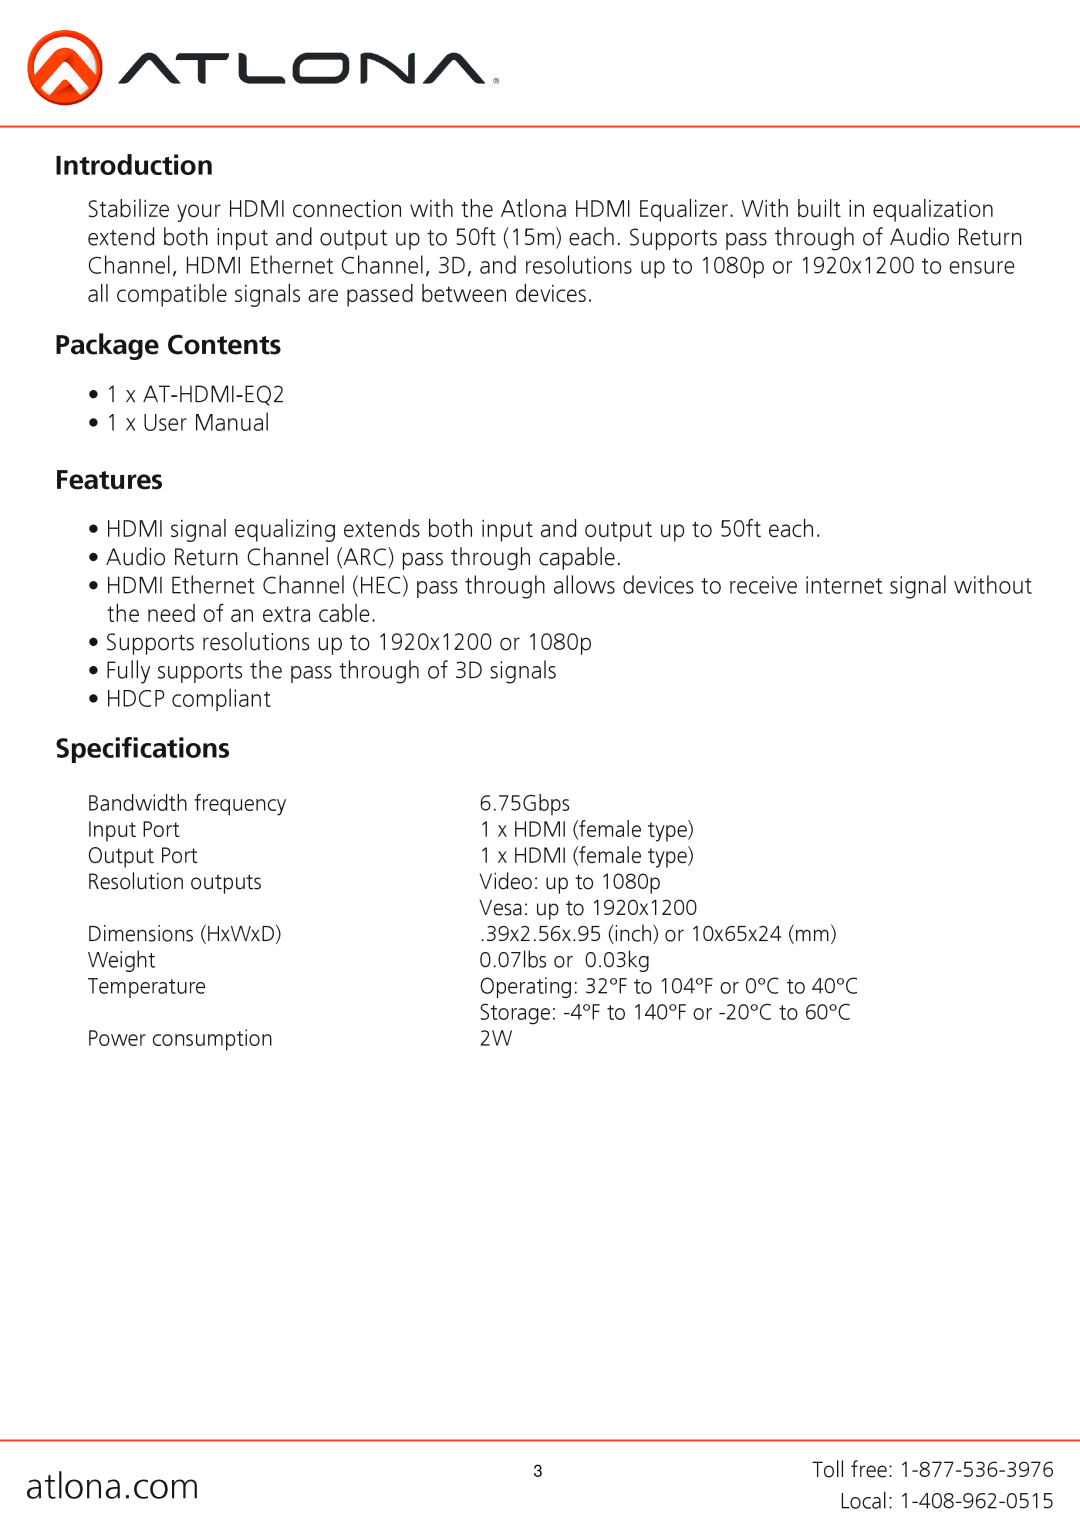 Atlona AT-HDMI-EQ2 user manual Introduction, Package Contents, Features, Specifications 